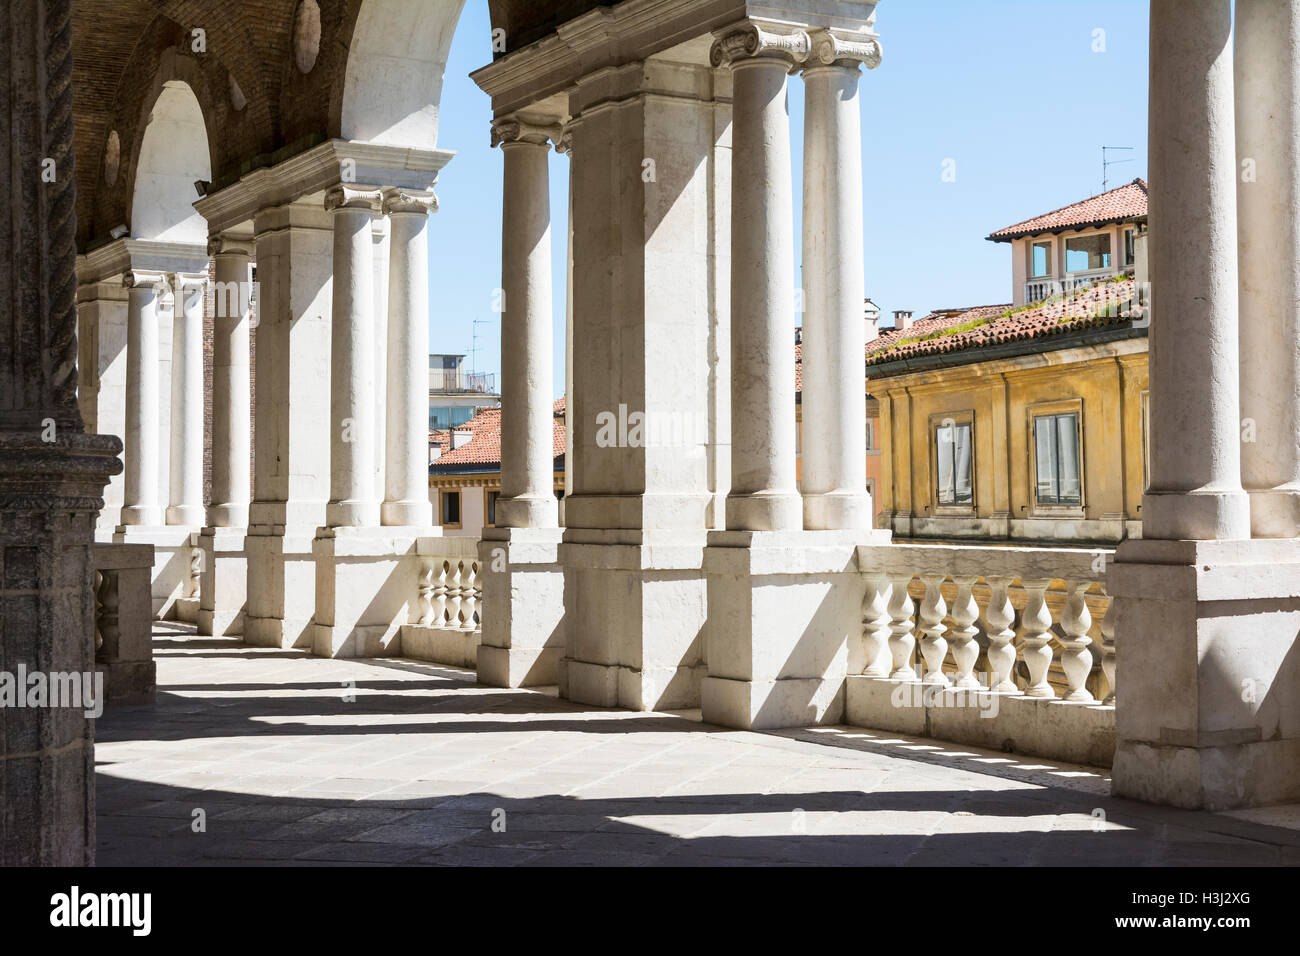 Vicenza,Italy-April 3,2015:view of  the  famous colonnade of the Palladian basilica in the center of Vicenza during a sunny day. Stock Photo